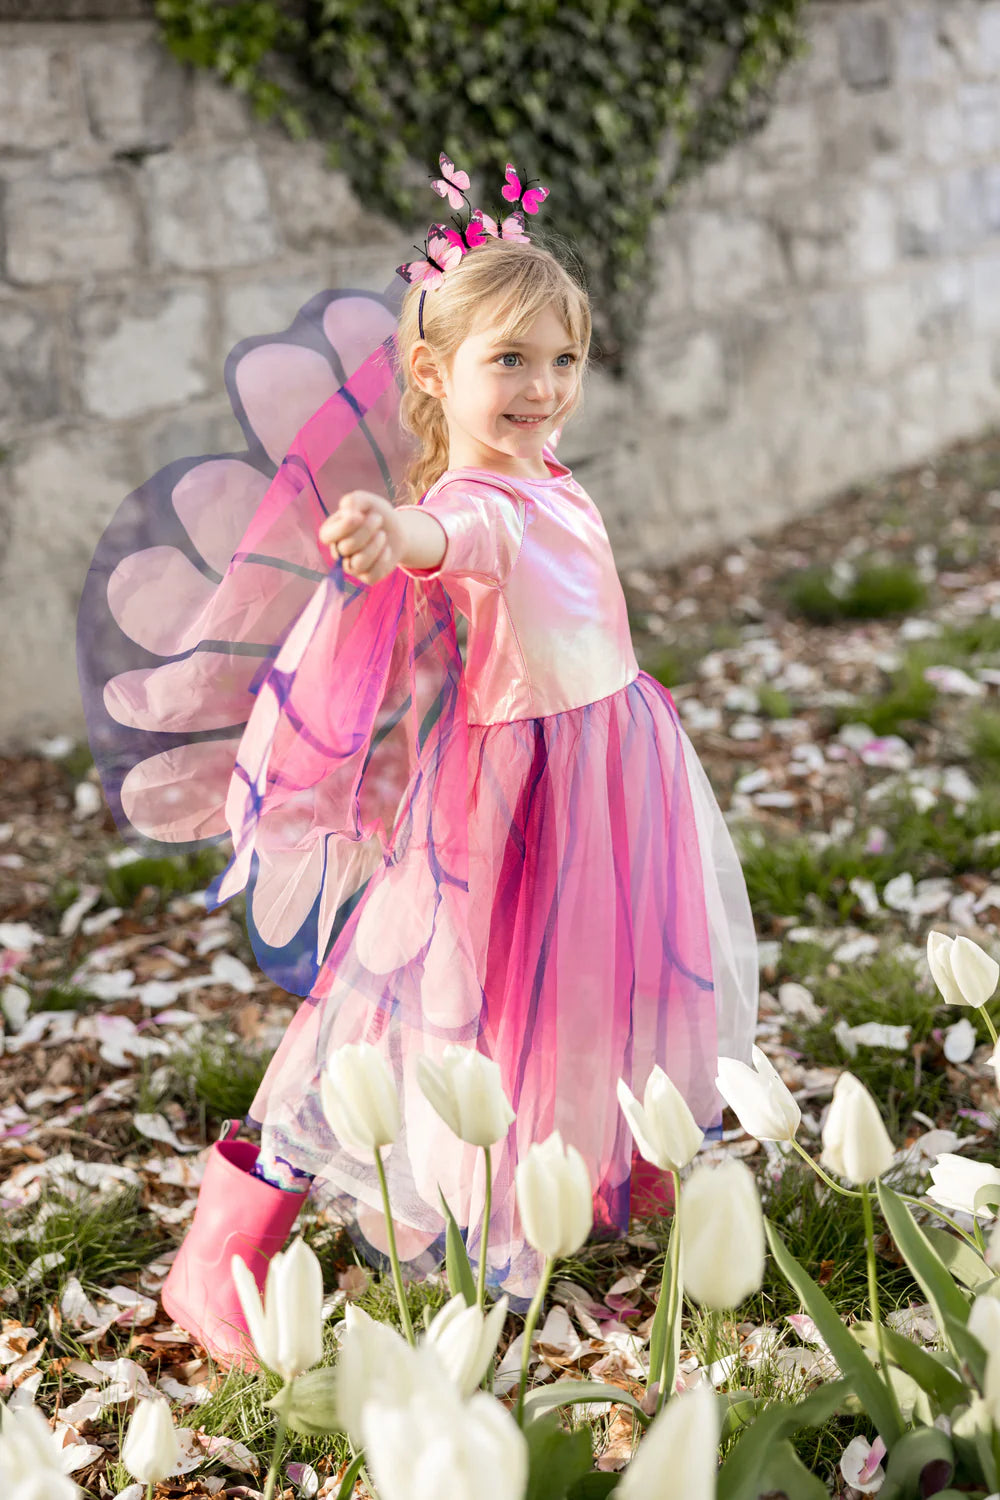 Butterfly Twirl Dress with Wings, Pink